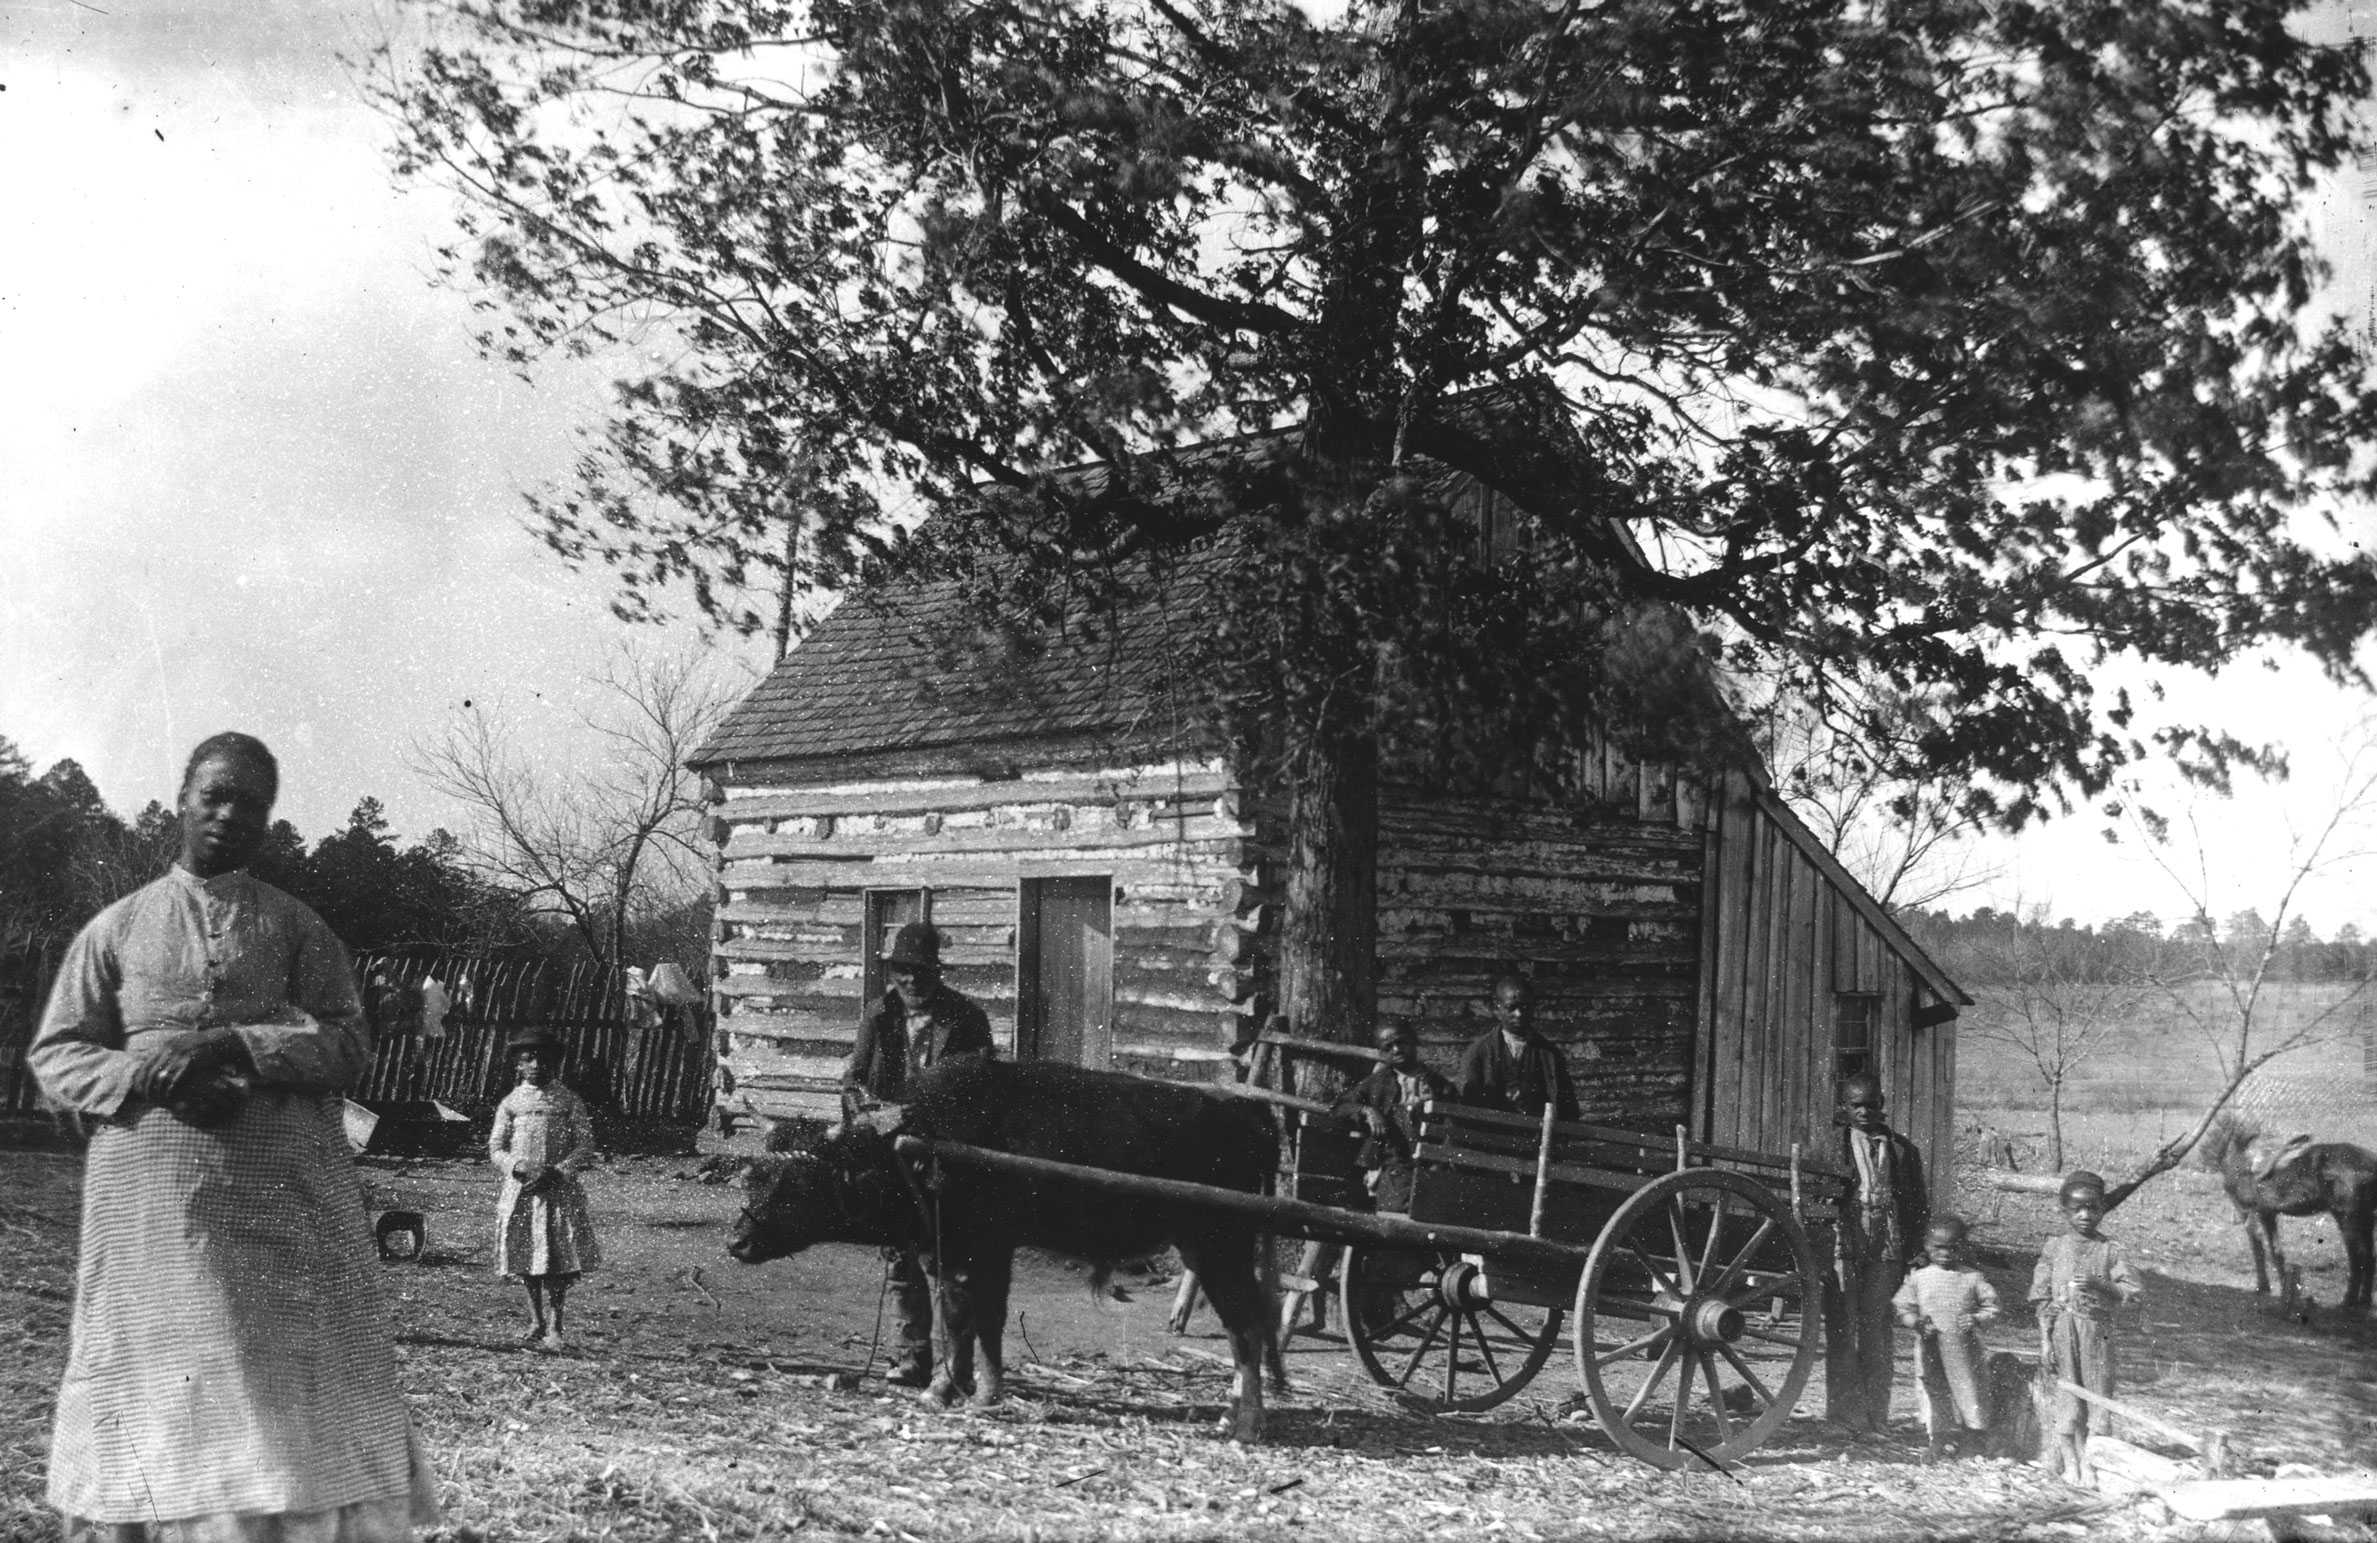 A family poses for a photograph in front of their log cabin. There are multiple children around the ox.